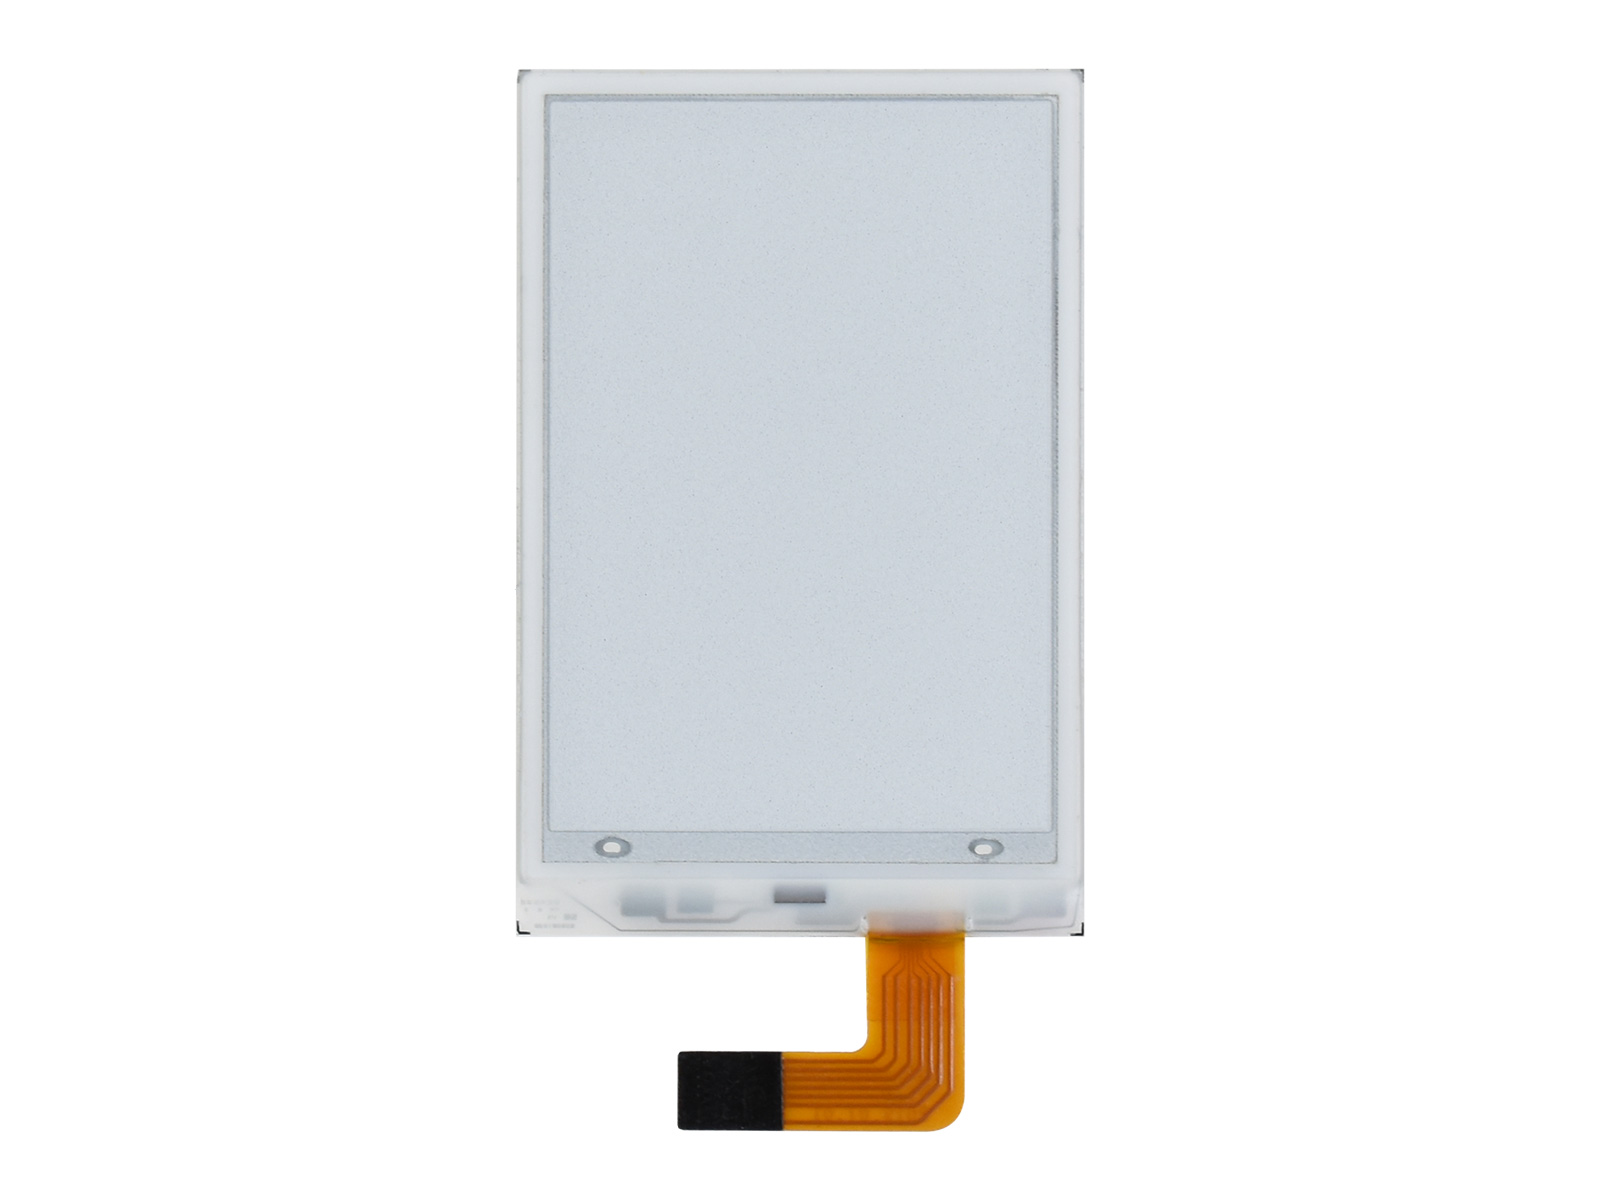 1.9inch Segment E-Paper Raw Display, 91 Segments, I2C Bus, Ideal for Temperature and humidity meter,